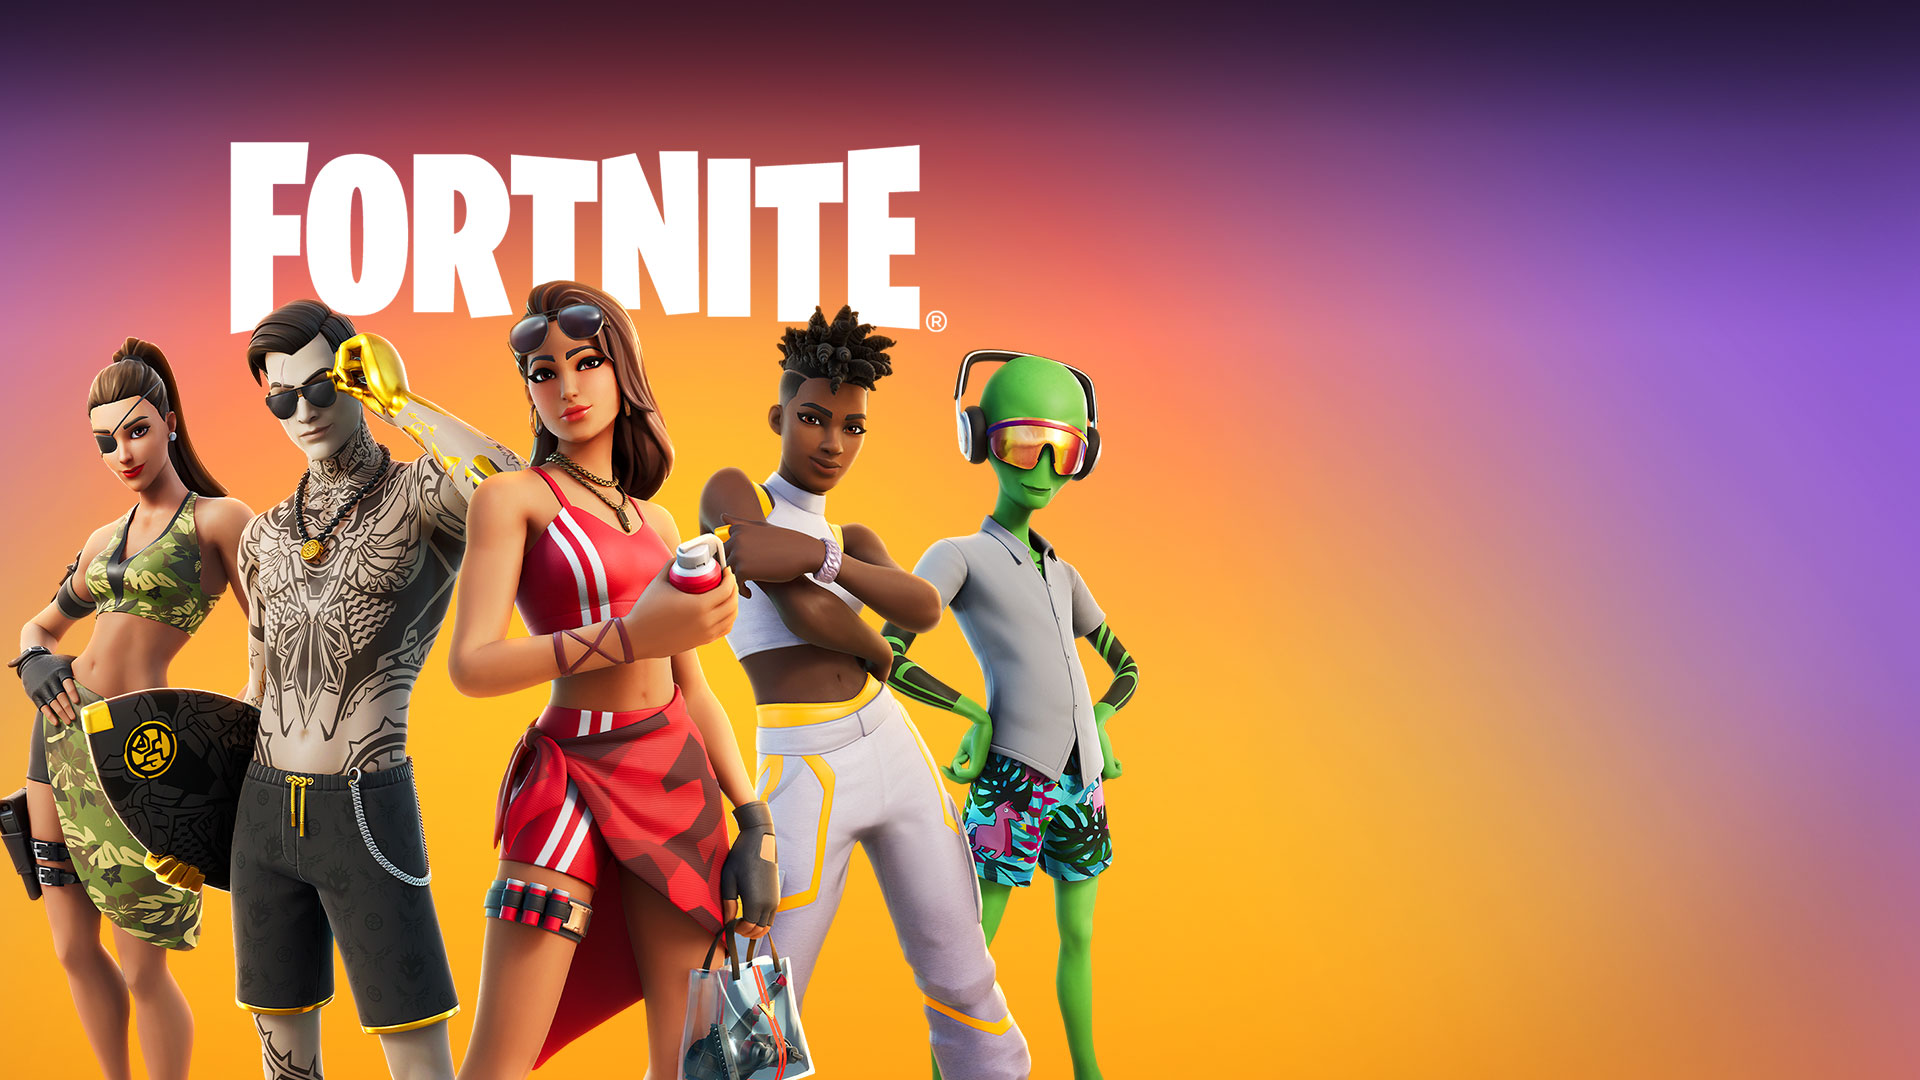 Five Fortnite characters in street clothes pose together.